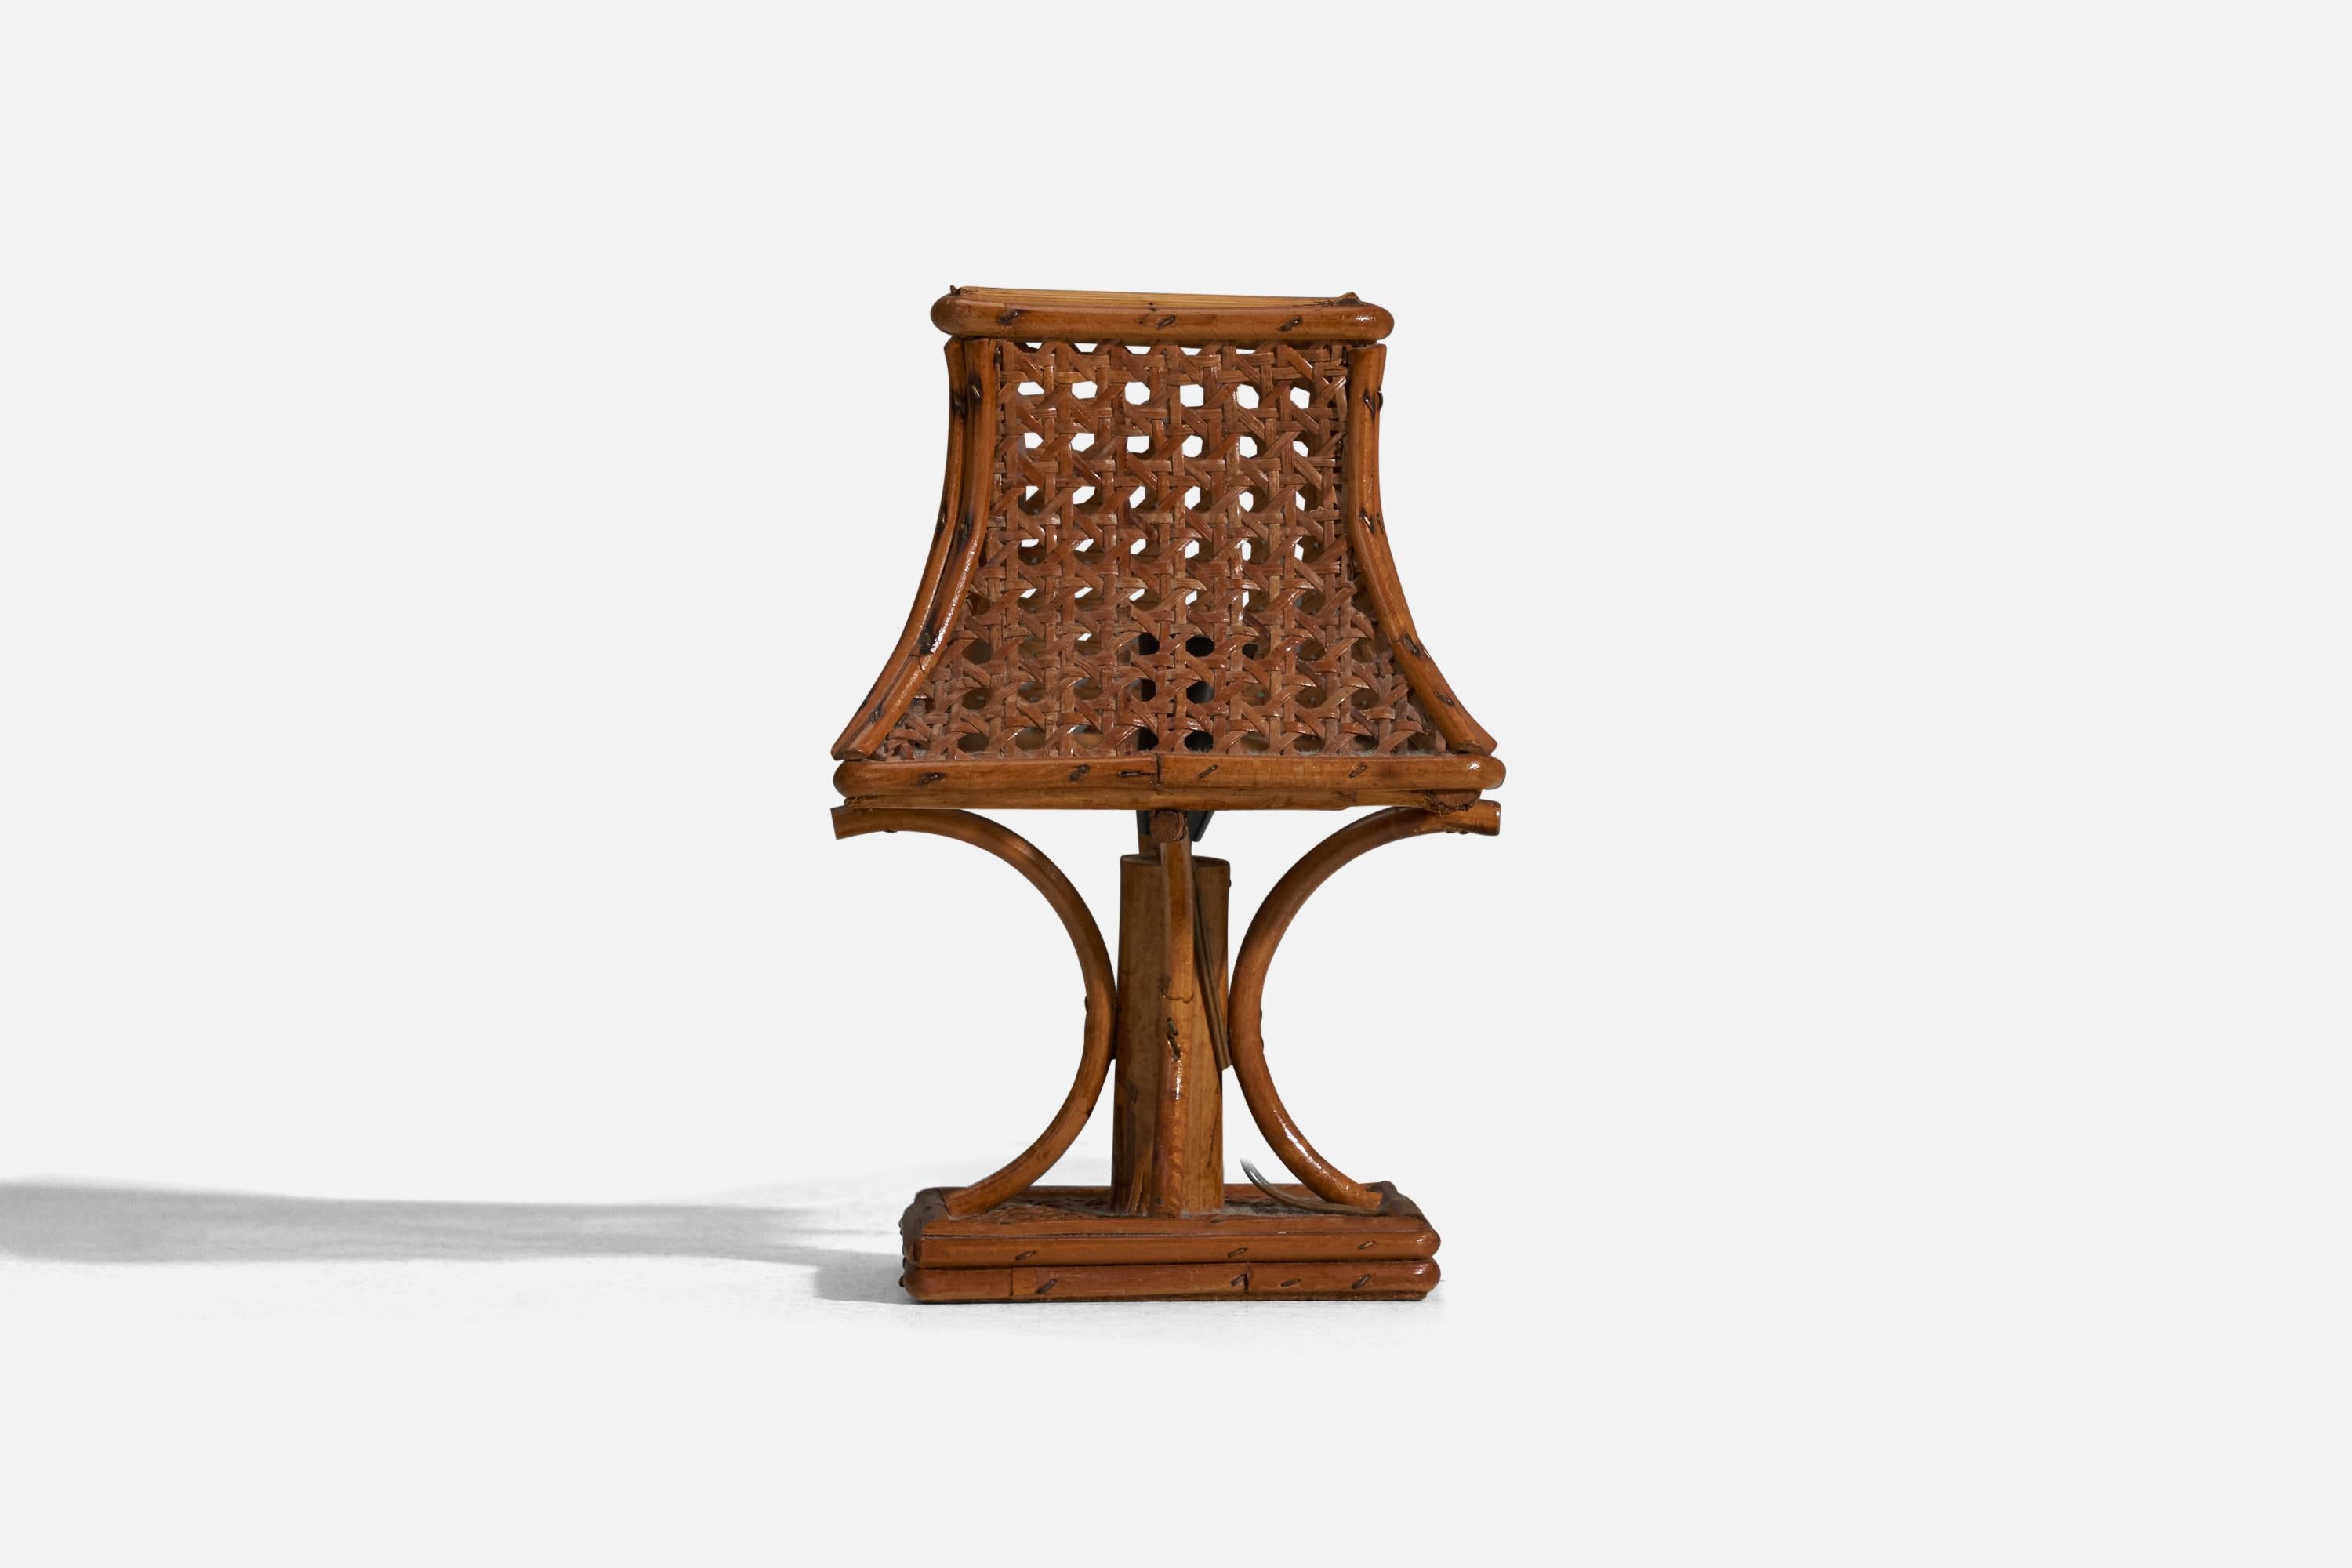 A pair of rattan table lamps designed and produced in Italy, 1970s.

Socket takes E-14 bulb.

There is no maximum wattage stated on the fixture.